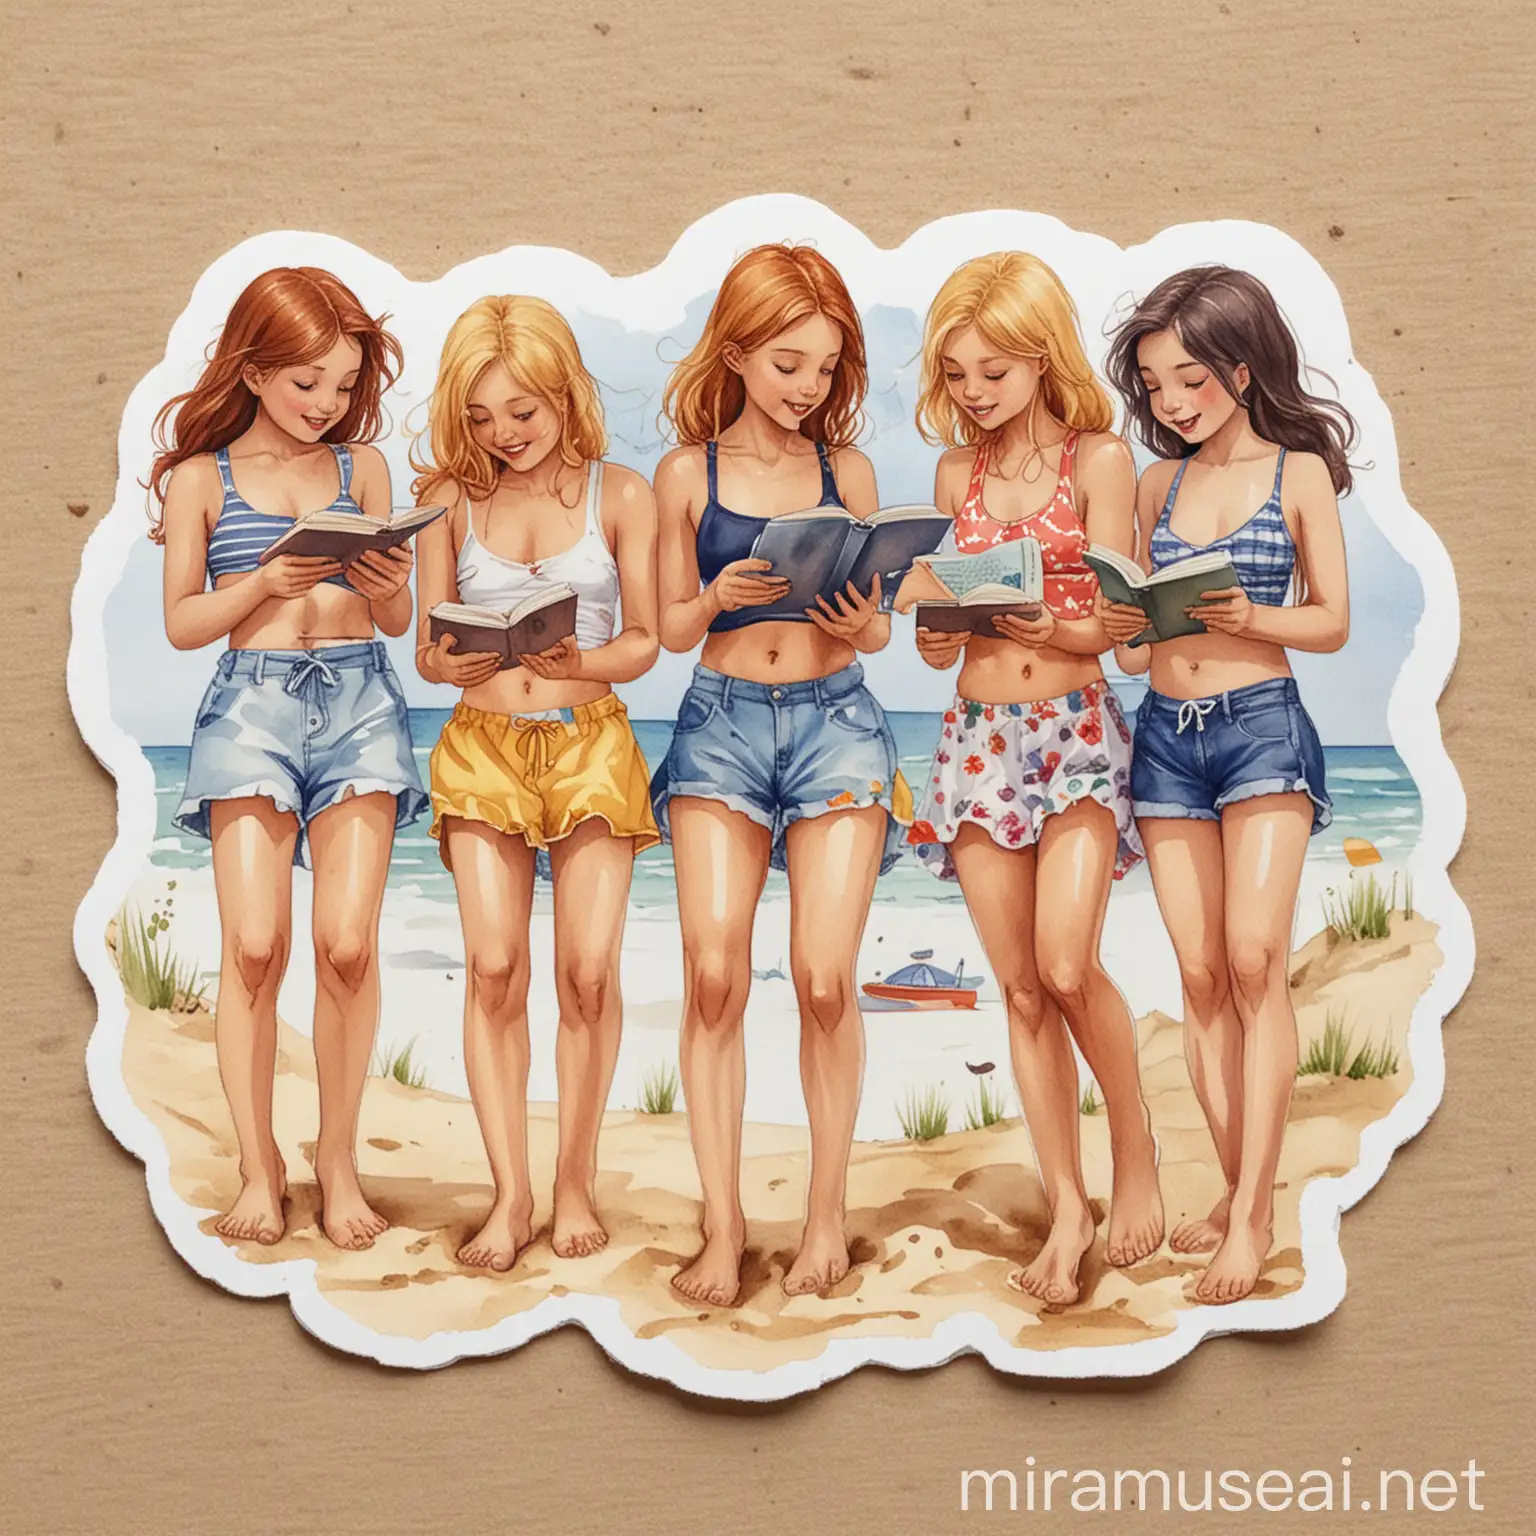 Group of Girls Reading Books on Beach in Bikinis and Shorts